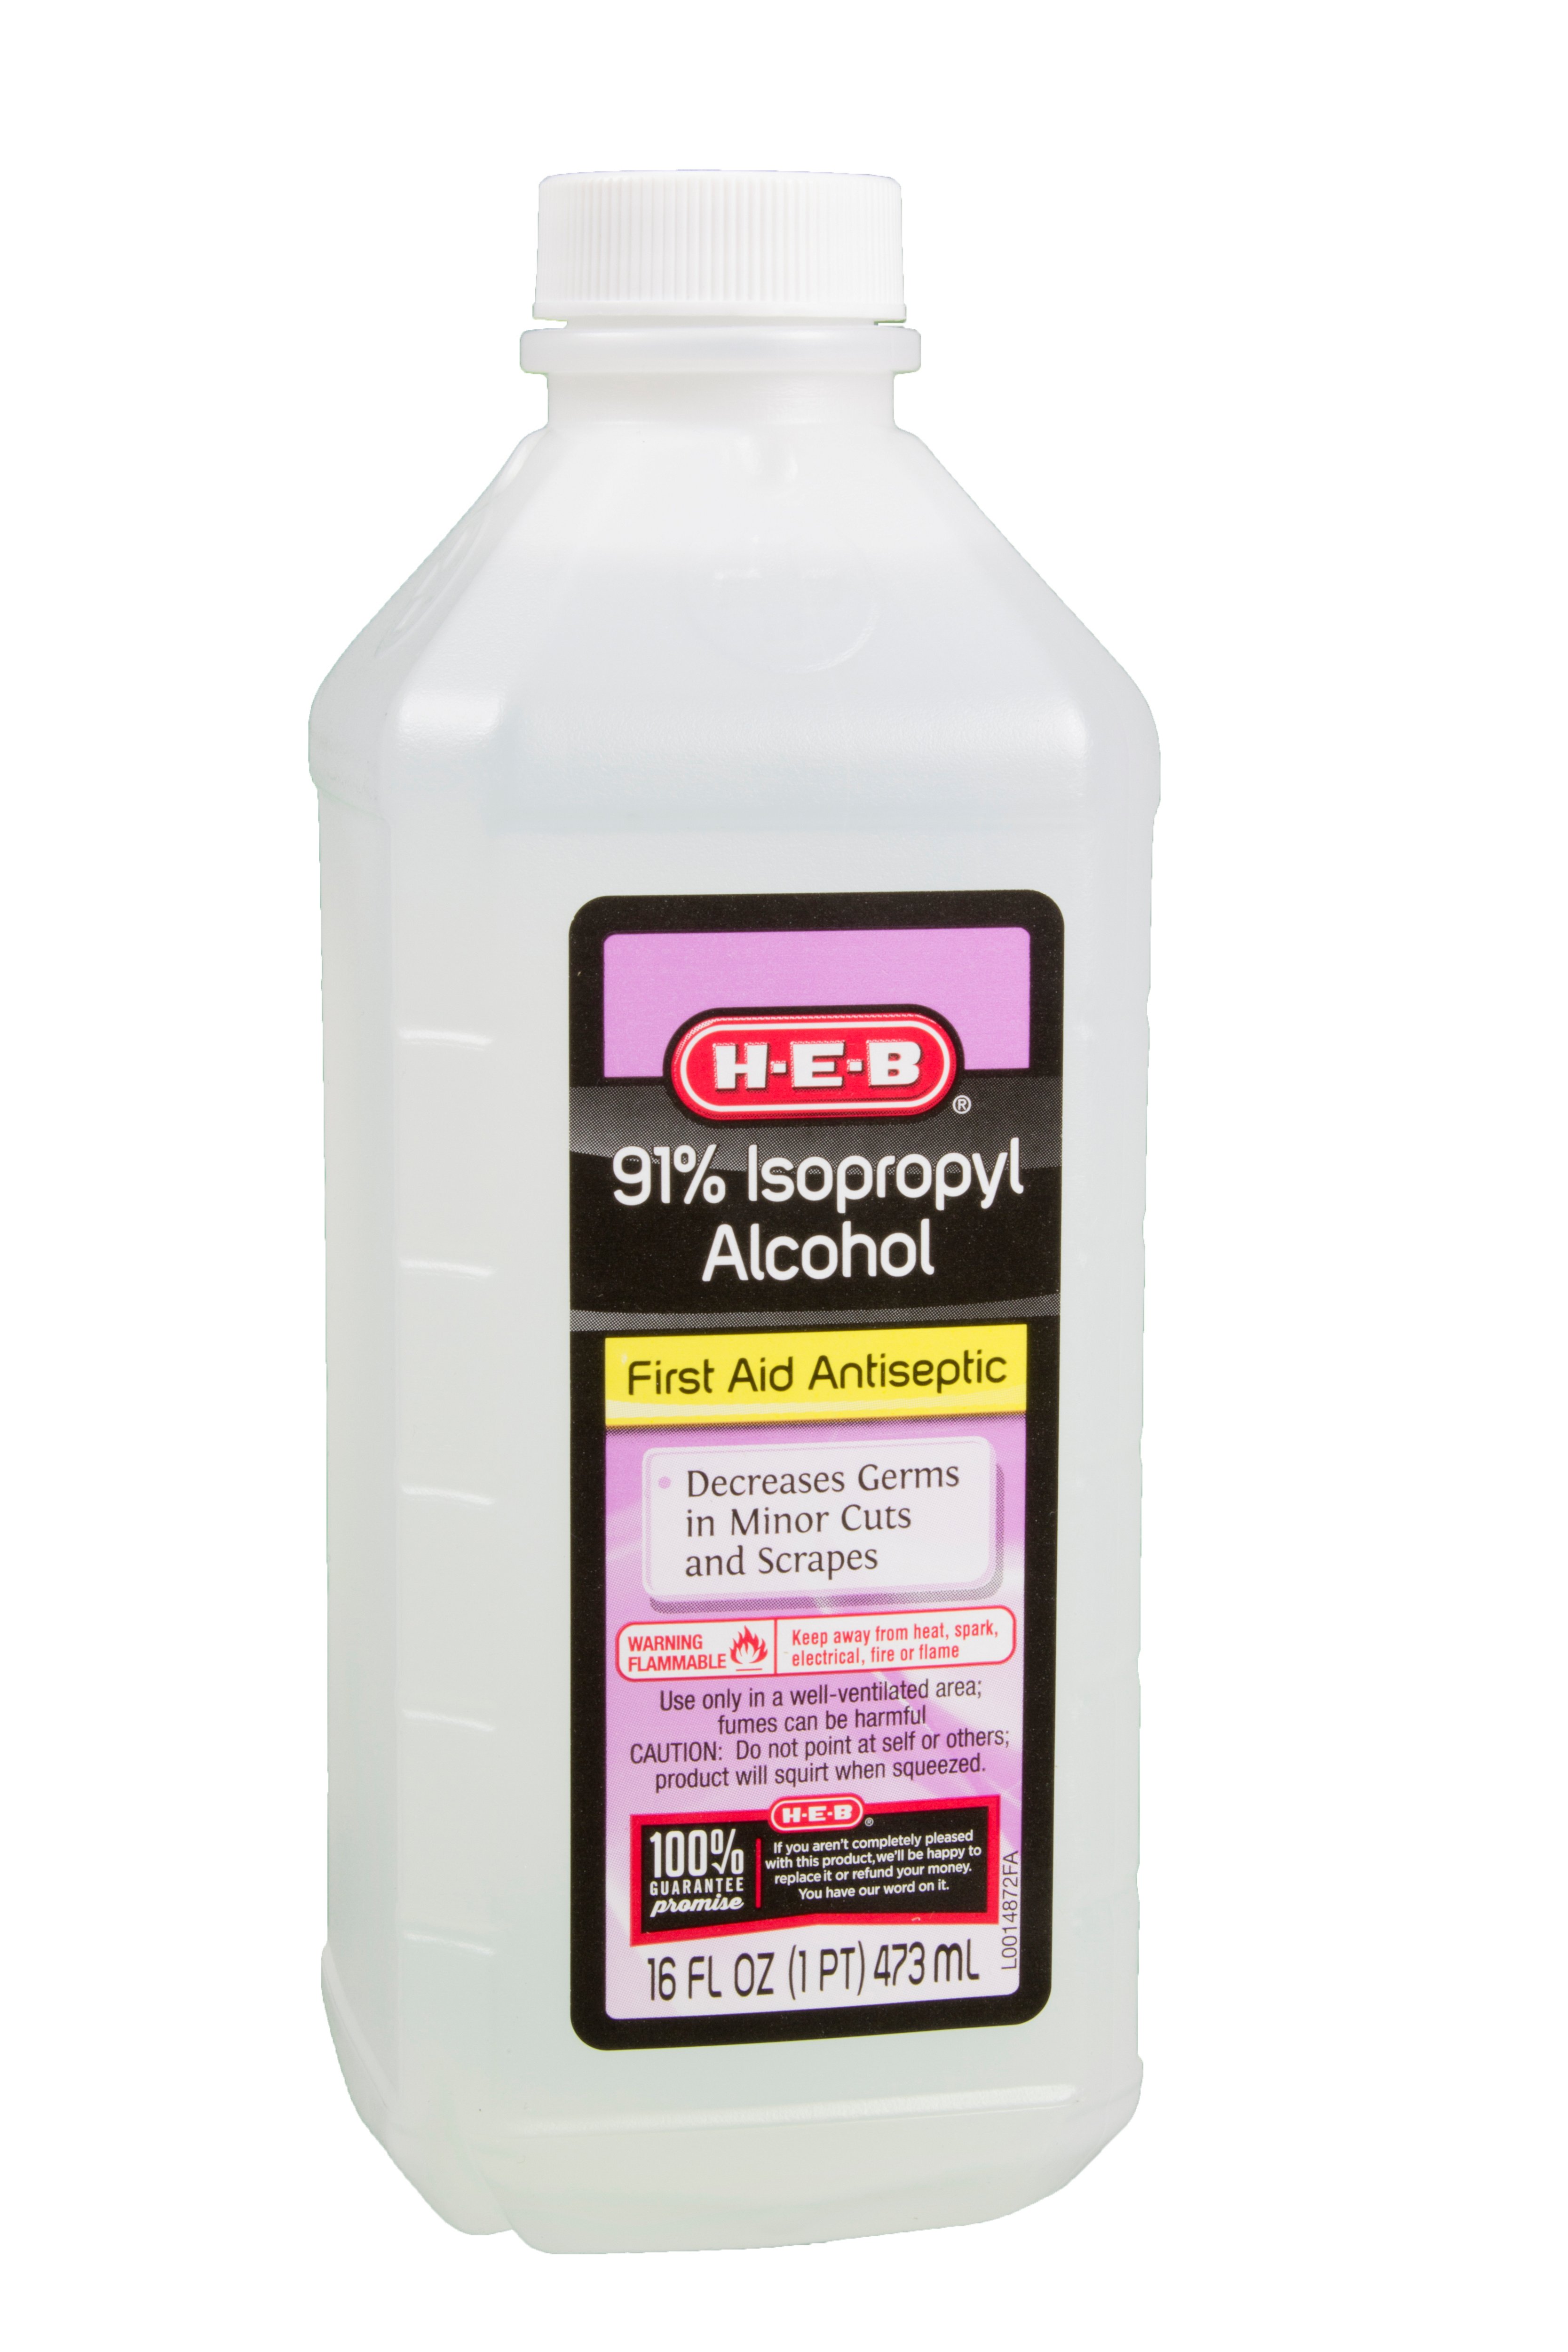 H-E-B Isopropyl Alcohol First Aid Antiseptic – 91%